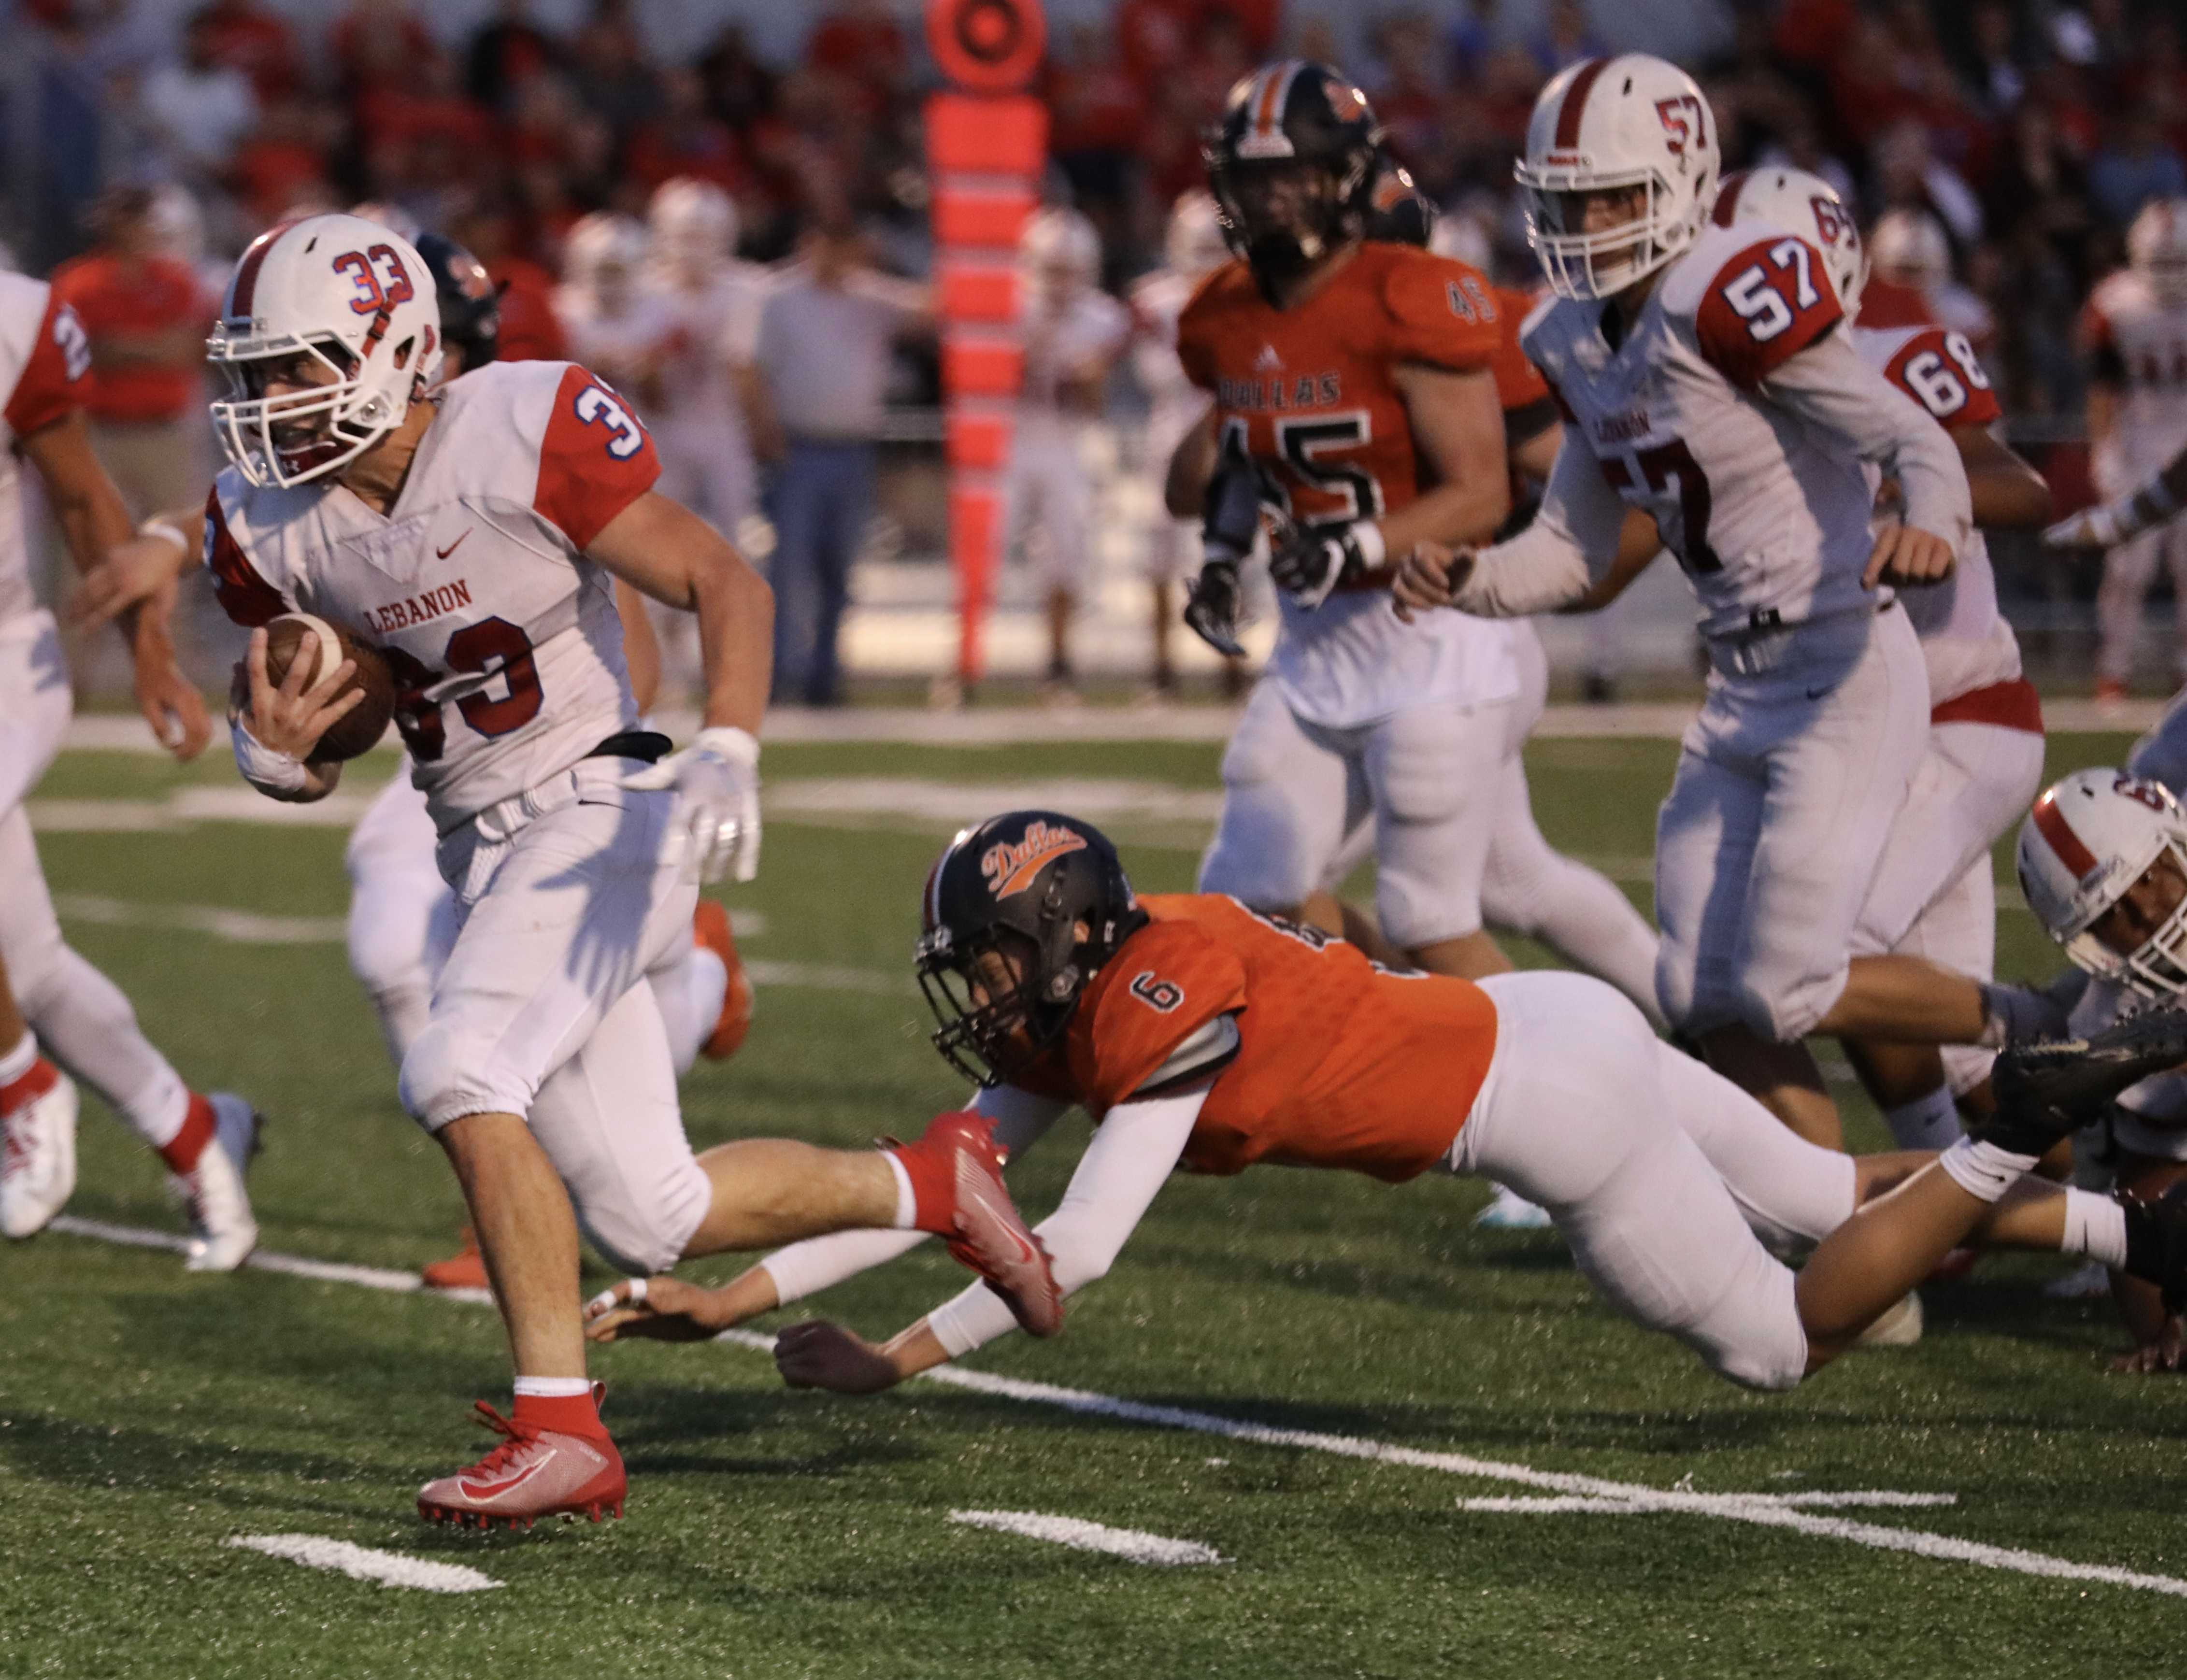 Lebanon running back Brock Barrett escapes the tackle of Dallas' Luke Hess for a 28-yard touchdown run. (Norm Maves Jr.)